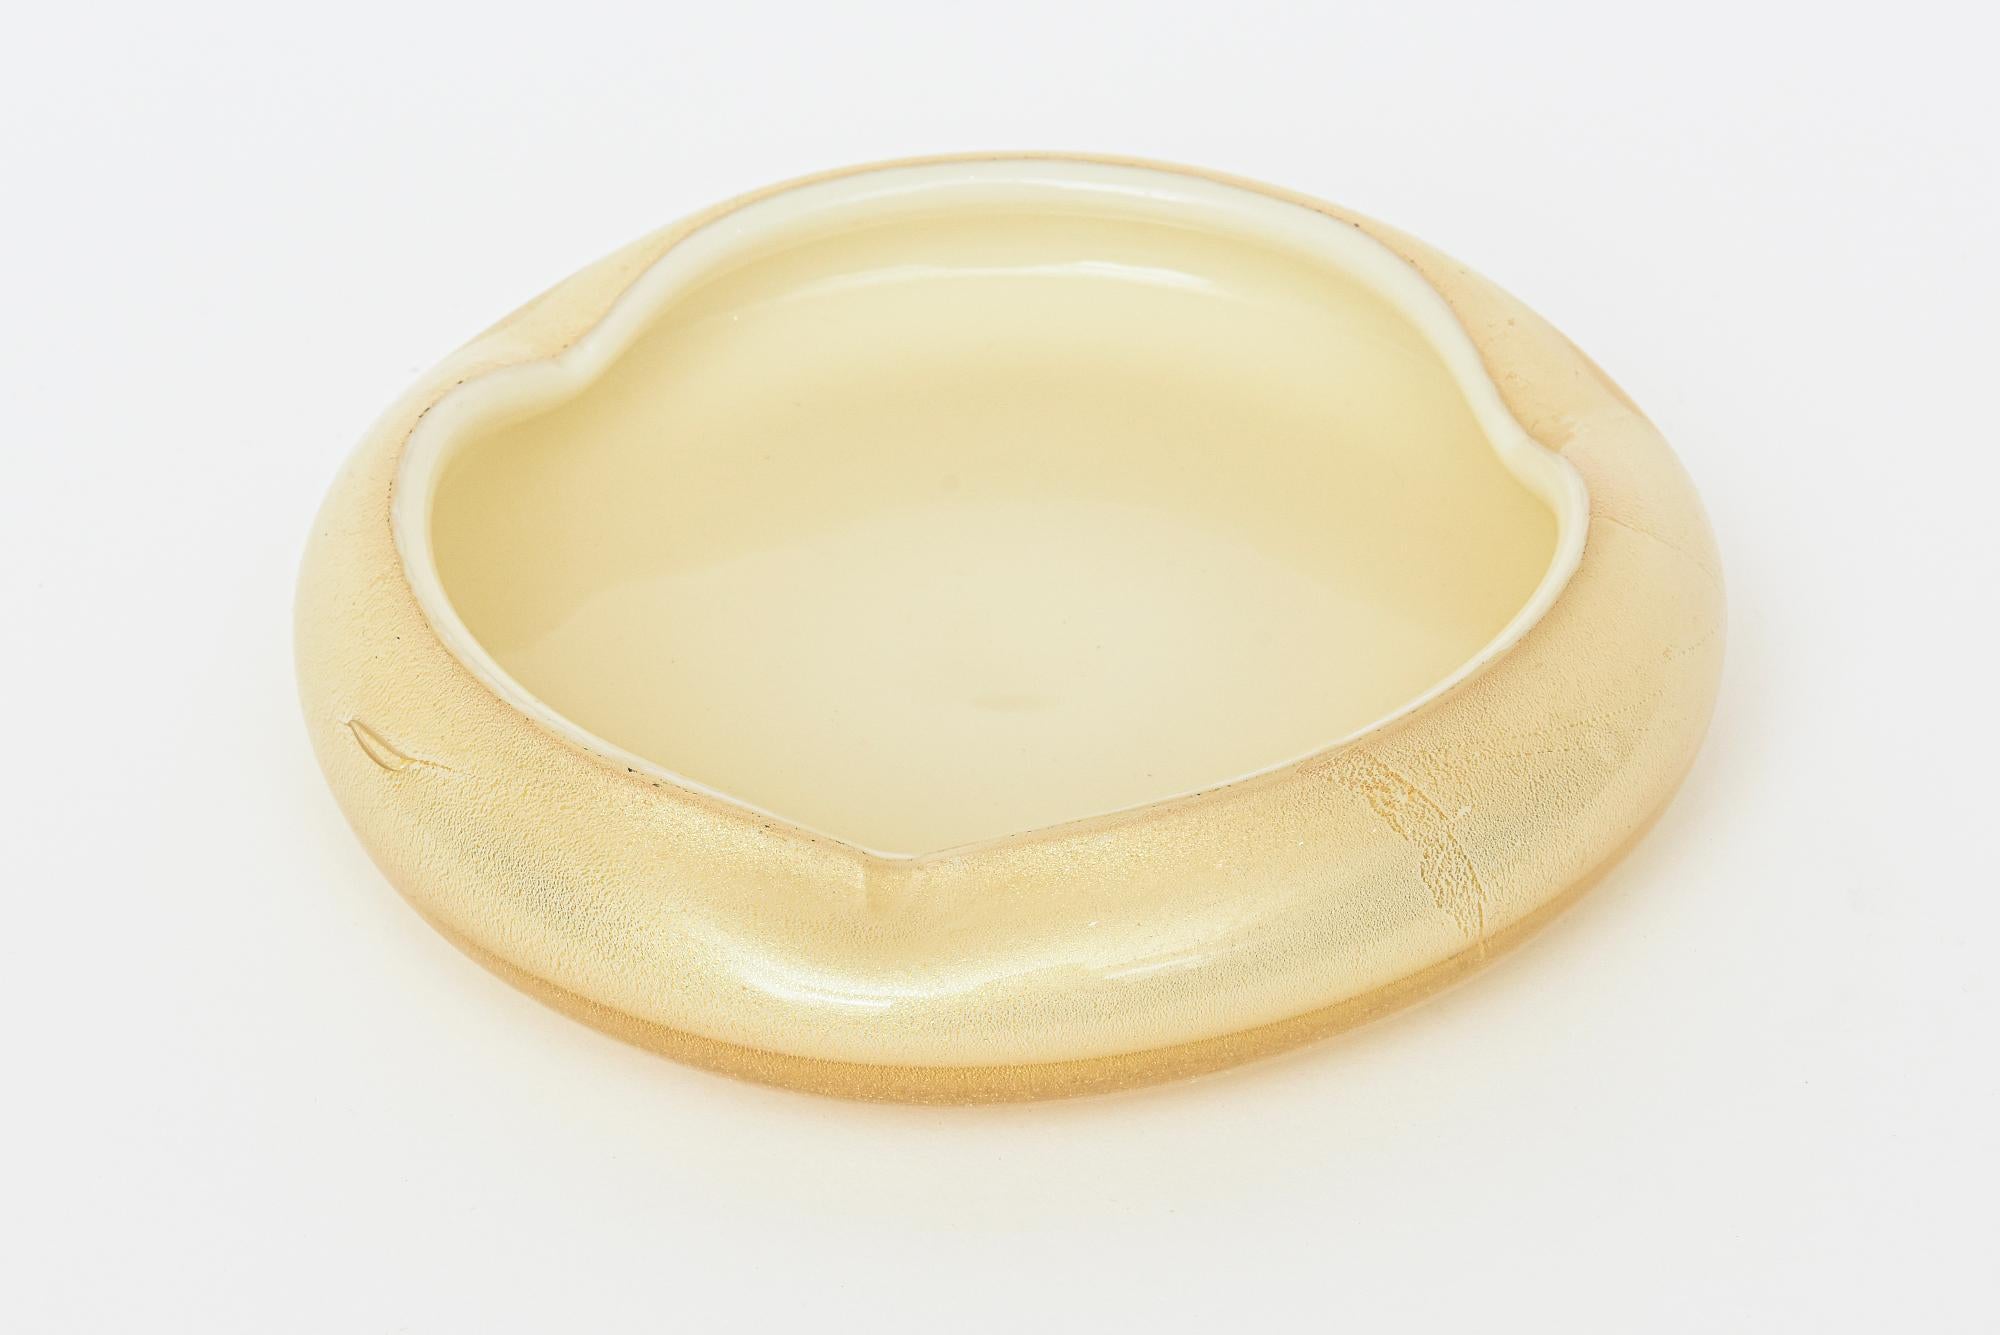 This low vintage Italian Murano hand blown bowl is by Archimede Seguso and is mid century modern. It has abundant gold aventurine and reads cream and gold with a white rim. It has 3 indented sides. In the interior it has a creamy interior. Great for